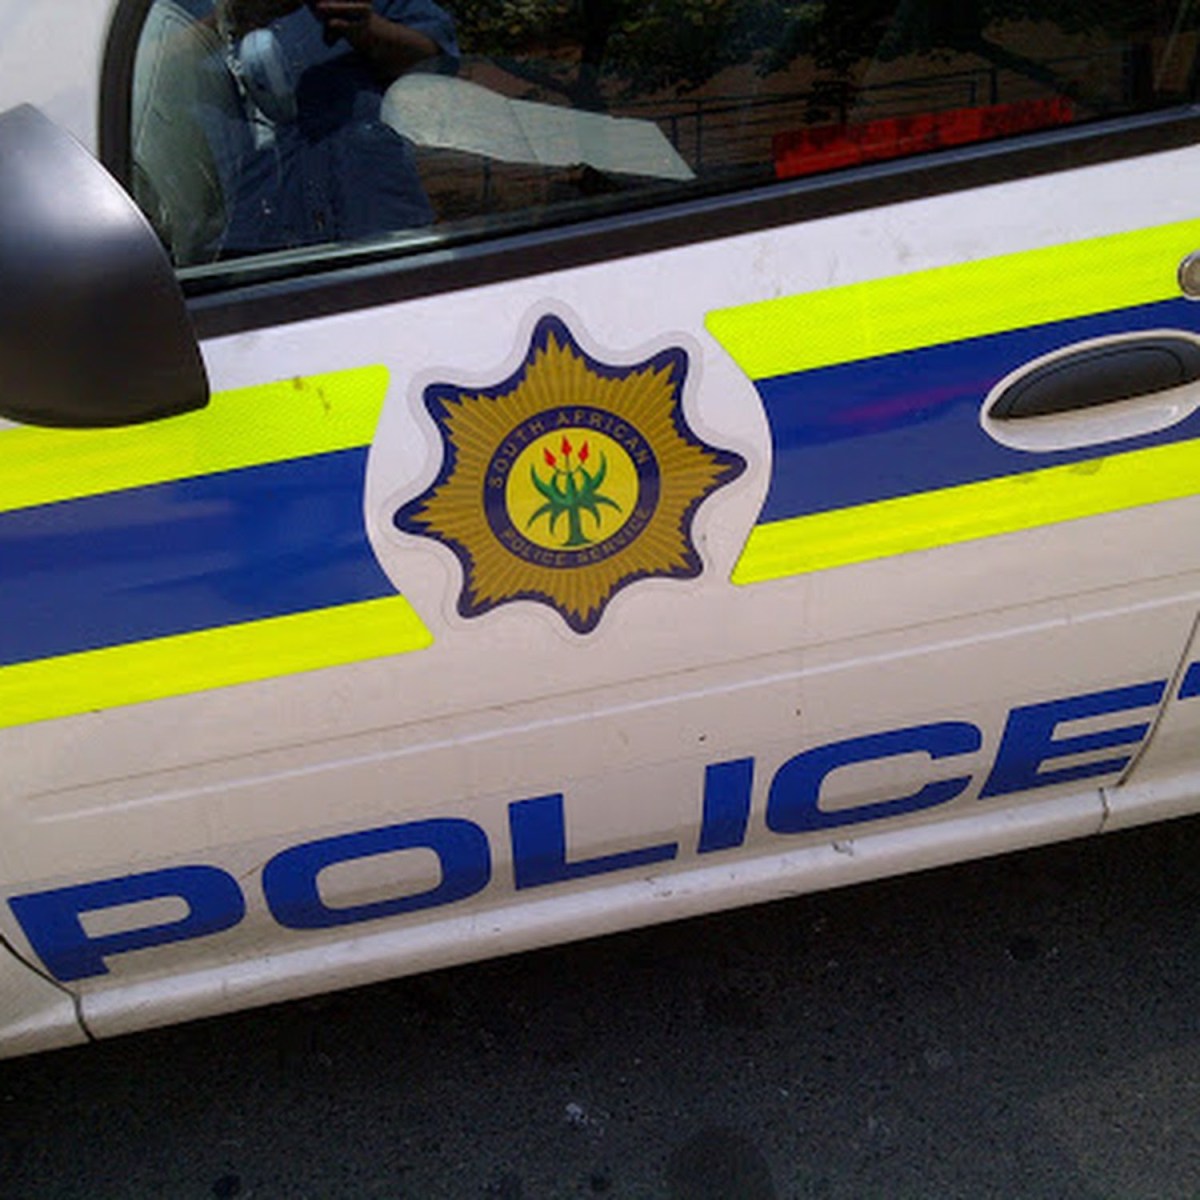 42 People to appear before the Pretoria Magistrates’ Court in the R56 million police vehicle branding case